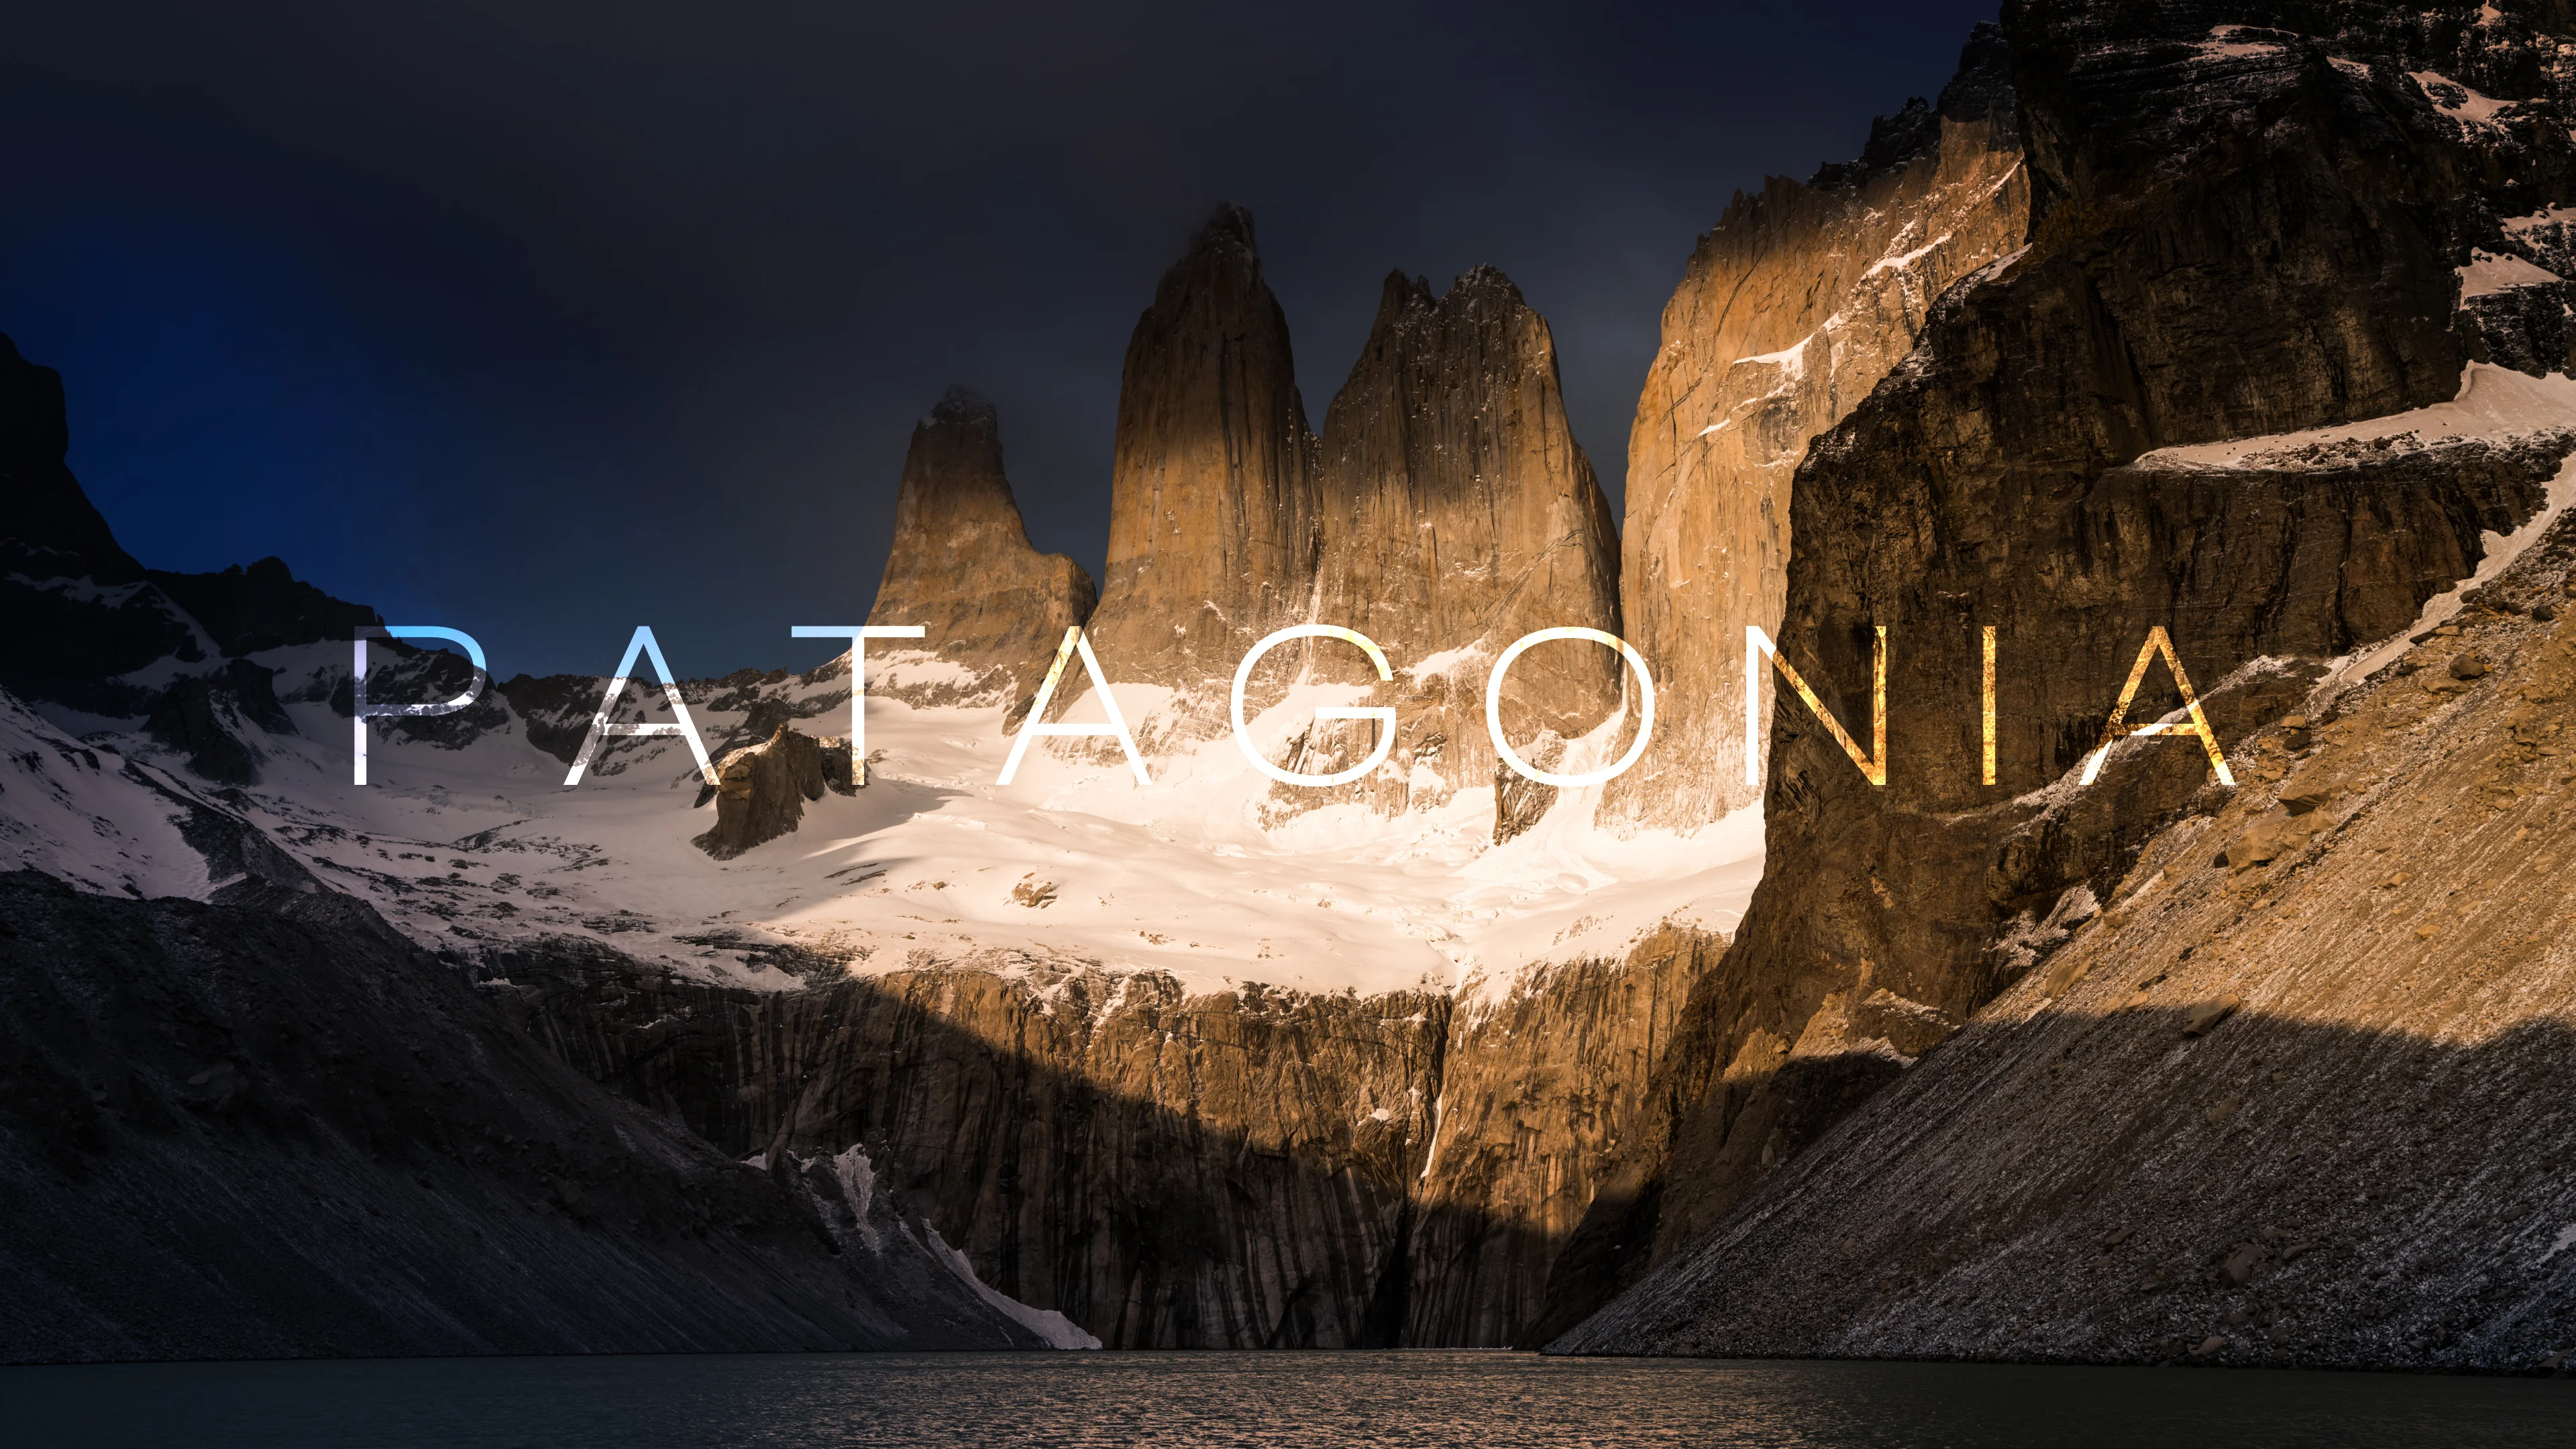 A Patagonia Adventure in Real Life - presented by REI on Vimeo